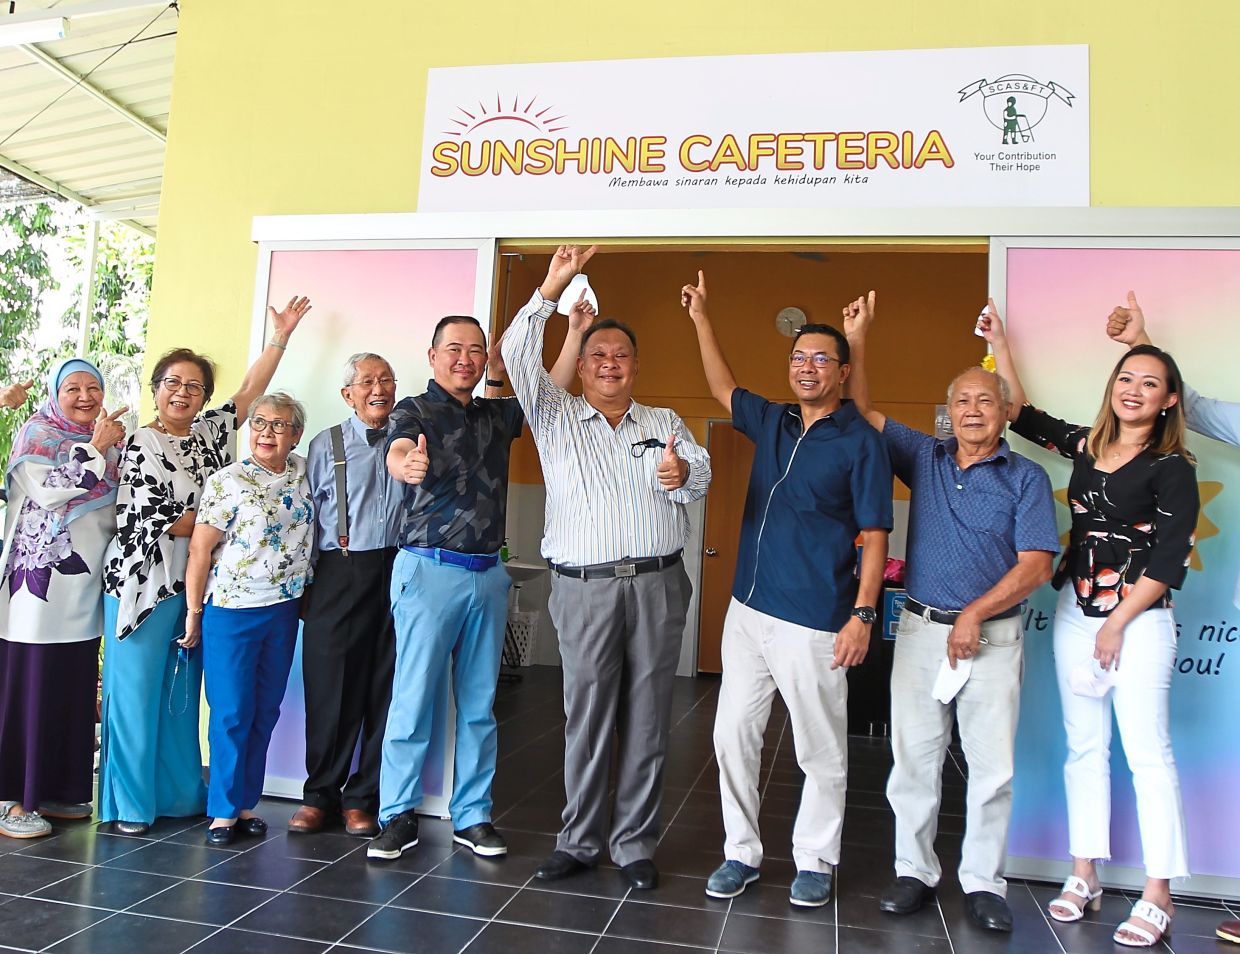 Lim (second from left), Hong (sixth from left), Touch ‘n Go’s group chief executive officer Effendy Shahul Hamid (third from right) and its corporate development officer Lum Joy Deng (right) as well as association board members at the launch of Sunshine Cafeteria. (Face masks removed for photo)